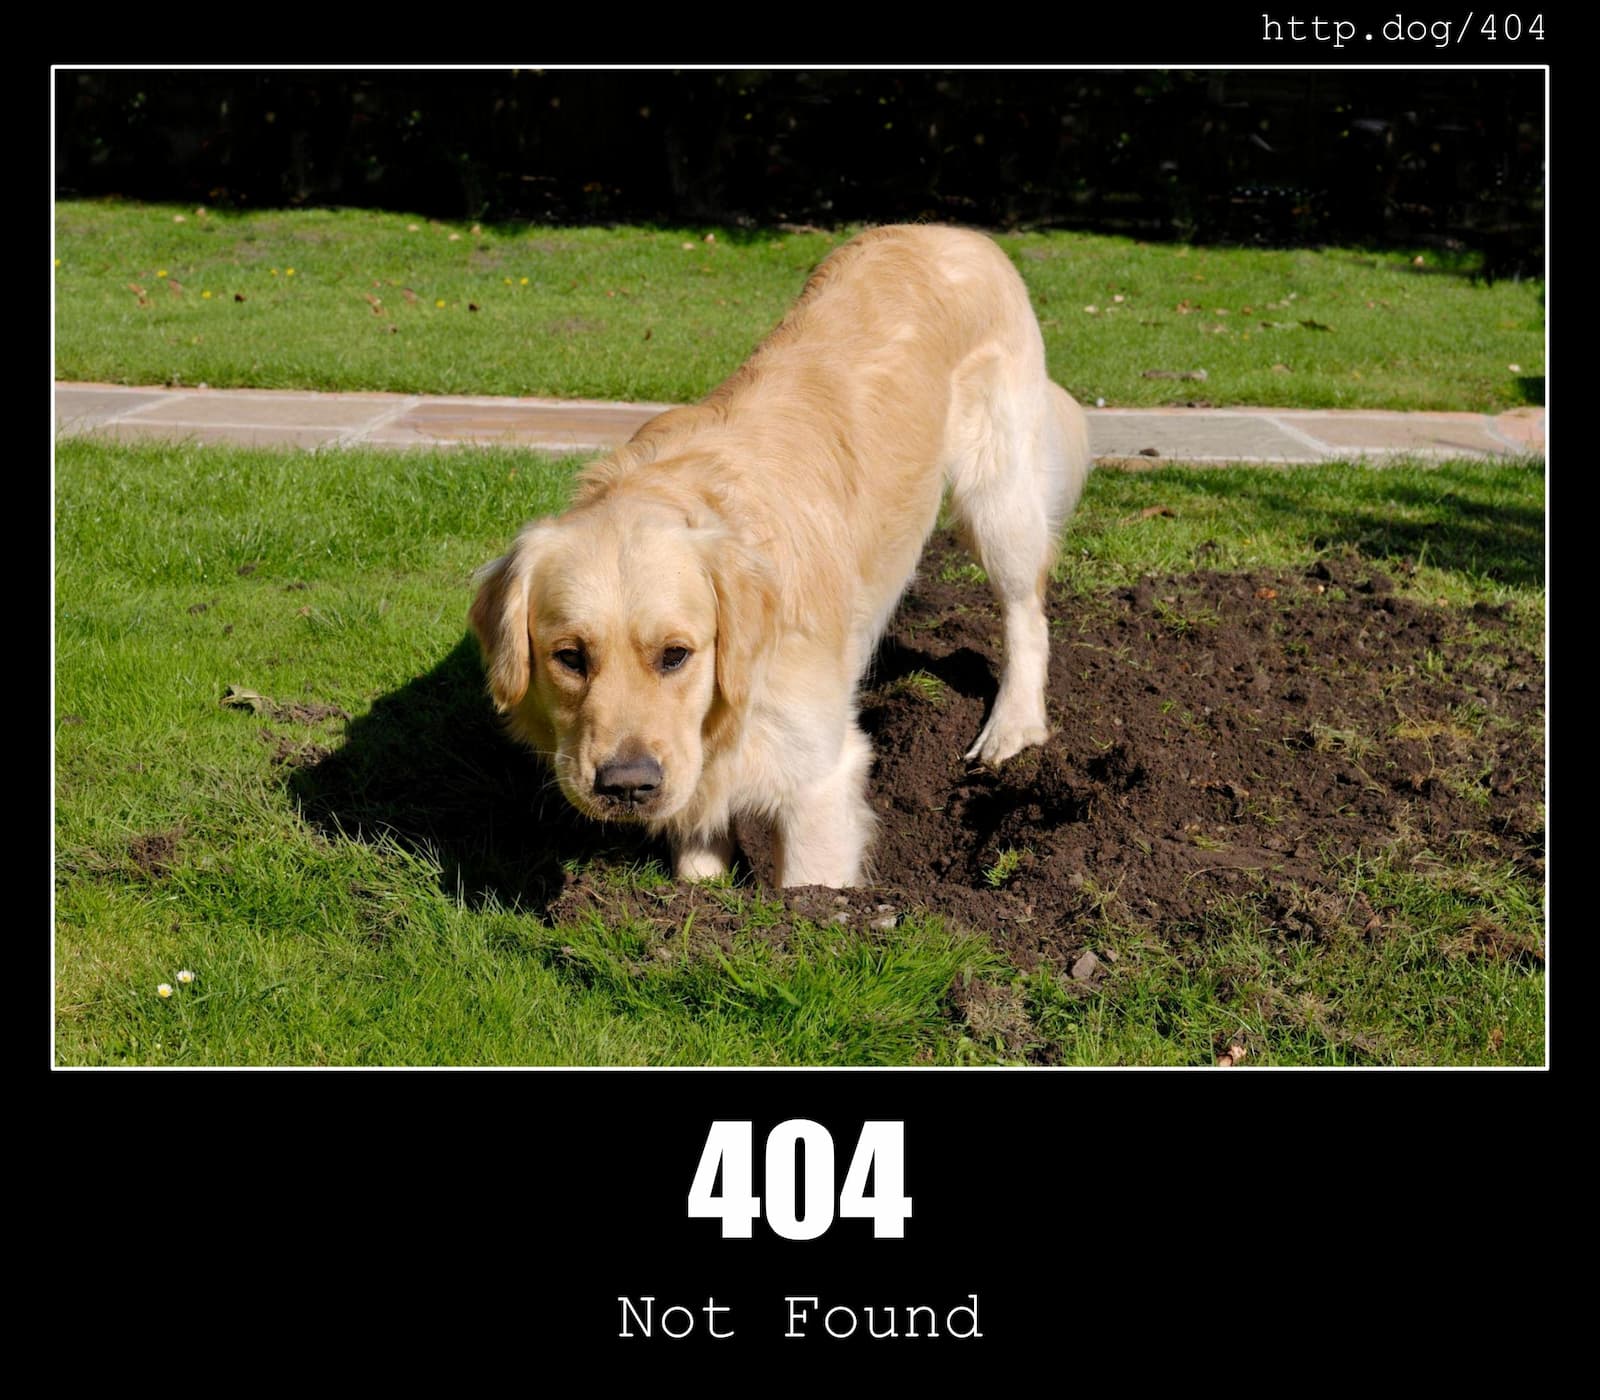 HTTP Status Code 404 Not Found & Dogs